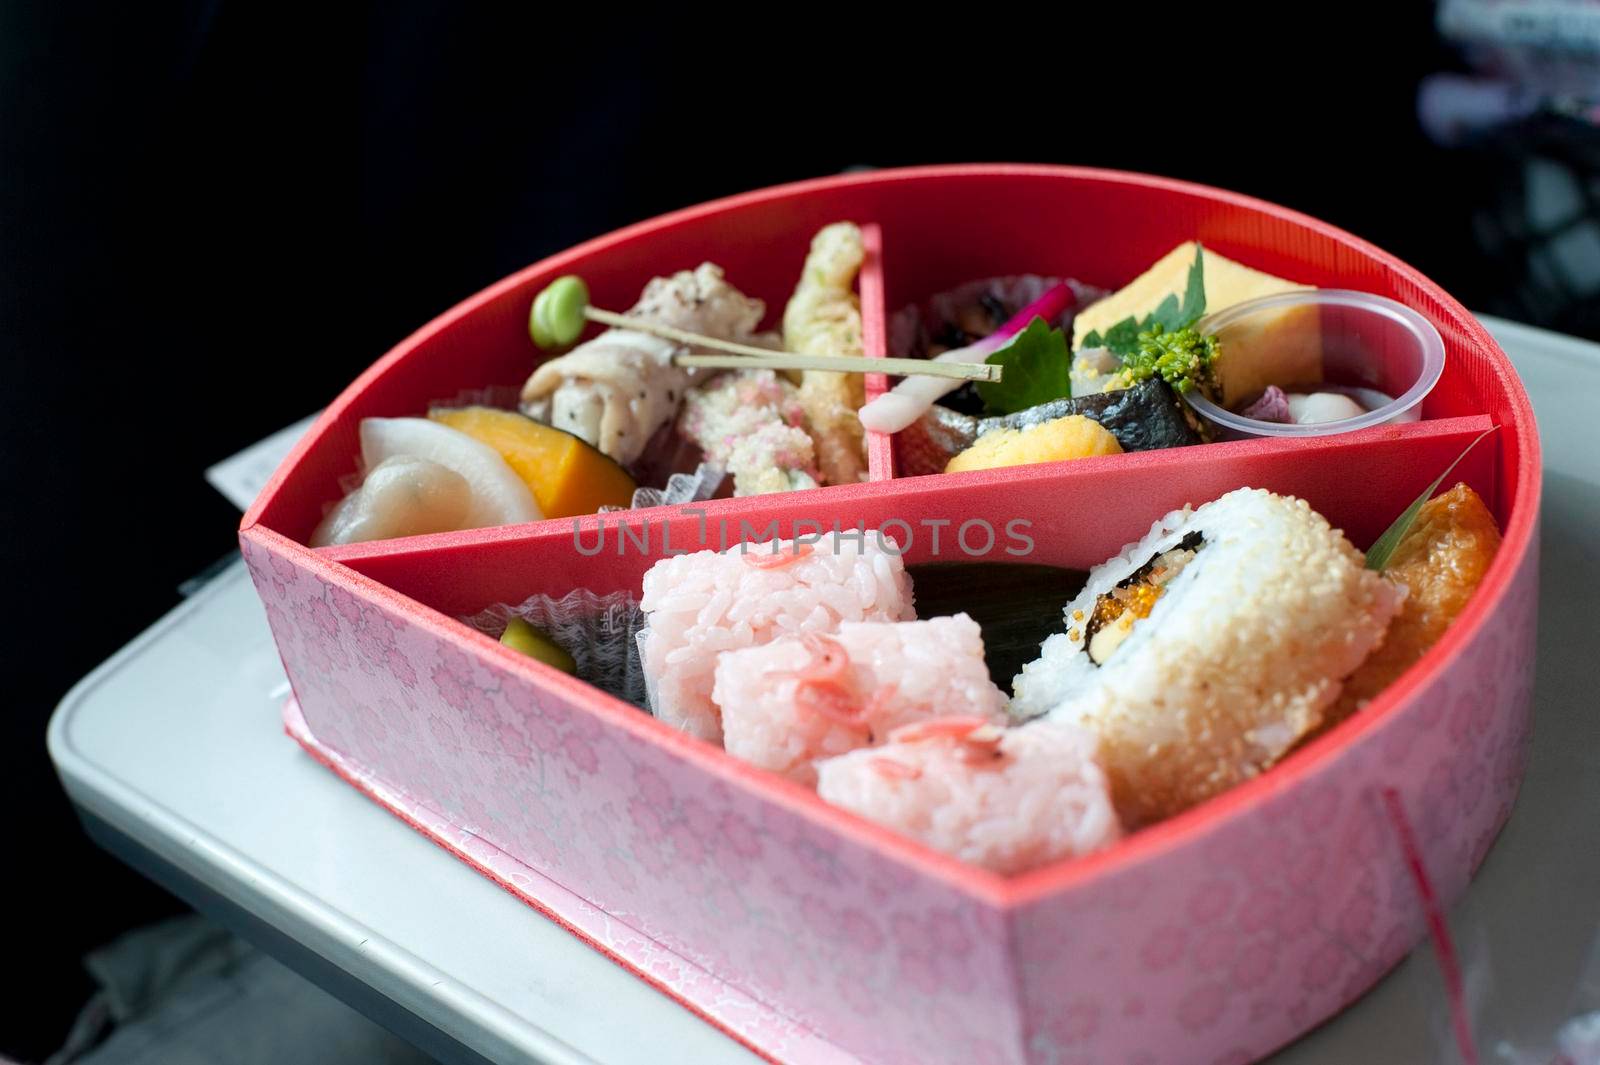 Serving of food inside a bento box, a lacquered container with internal divisions to house a complete traditional Japanese meal